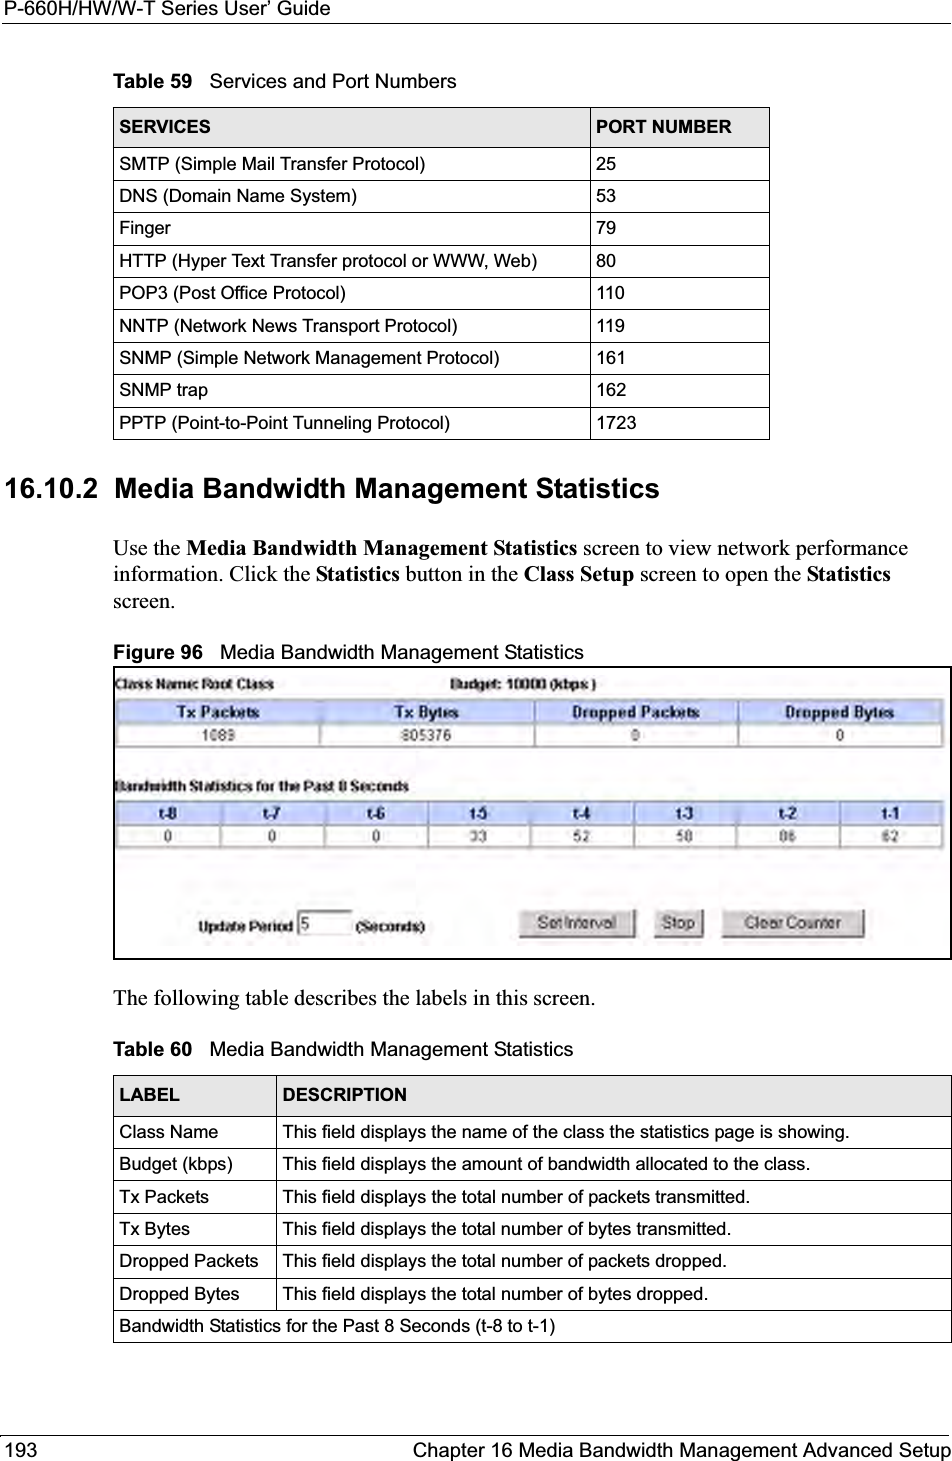 P-660H/HW/W-T Series User’ Guide193 Chapter 16 Media Bandwidth Management Advanced Setup16.10.2  Media Bandwidth Management Statistics  Use the Media Bandwidth Management Statistics screen to view network performance information. Click the Statistics button in the Class Setup screen to open the Statisticsscreen.Figure 96   Media Bandwidth Management Statistics The following table describes the labels in this screen.SMTP (Simple Mail Transfer Protocol) 25DNS (Domain Name System) 53Finger 79HTTP (Hyper Text Transfer protocol or WWW, Web) 80POP3 (Post Office Protocol) 110NNTP (Network News Transport Protocol) 119SNMP (Simple Network Management Protocol) 161SNMP trap 162PPTP (Point-to-Point Tunneling Protocol) 1723Table 59   Services and Port NumbersSERVICES PORT NUMBERTable 60   Media Bandwidth Management StatisticsLABEL DESCRIPTIONClass Name This field displays the name of the class the statistics page is showing. Budget (kbps) This field displays the amount of bandwidth allocated to the class. Tx Packets This field displays the total number of packets transmitted. Tx Bytes This field displays the total number of bytes transmitted. Dropped Packets This field displays the total number of packets dropped. Dropped Bytes This field displays the total number of bytes dropped. Bandwidth Statistics for the Past 8 Seconds (t-8 to t-1)